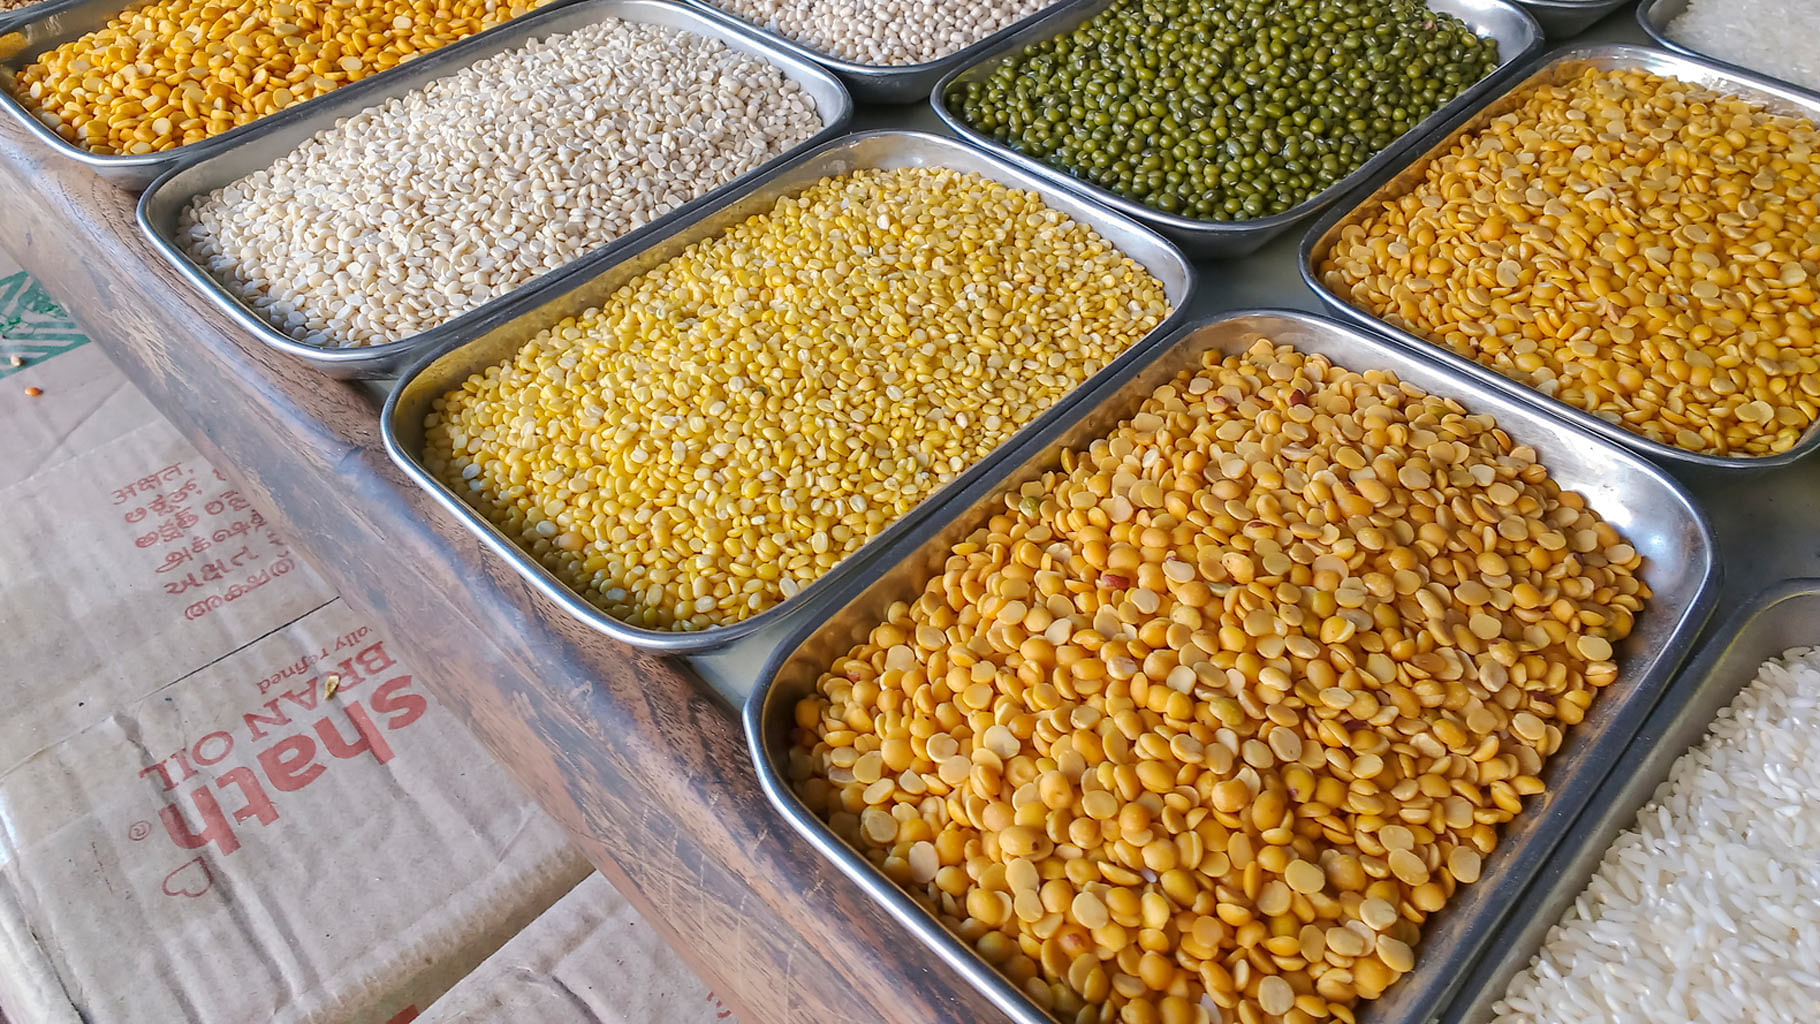 Prices of pulses have risen  over the past few months. (Photo: iStockphoto)